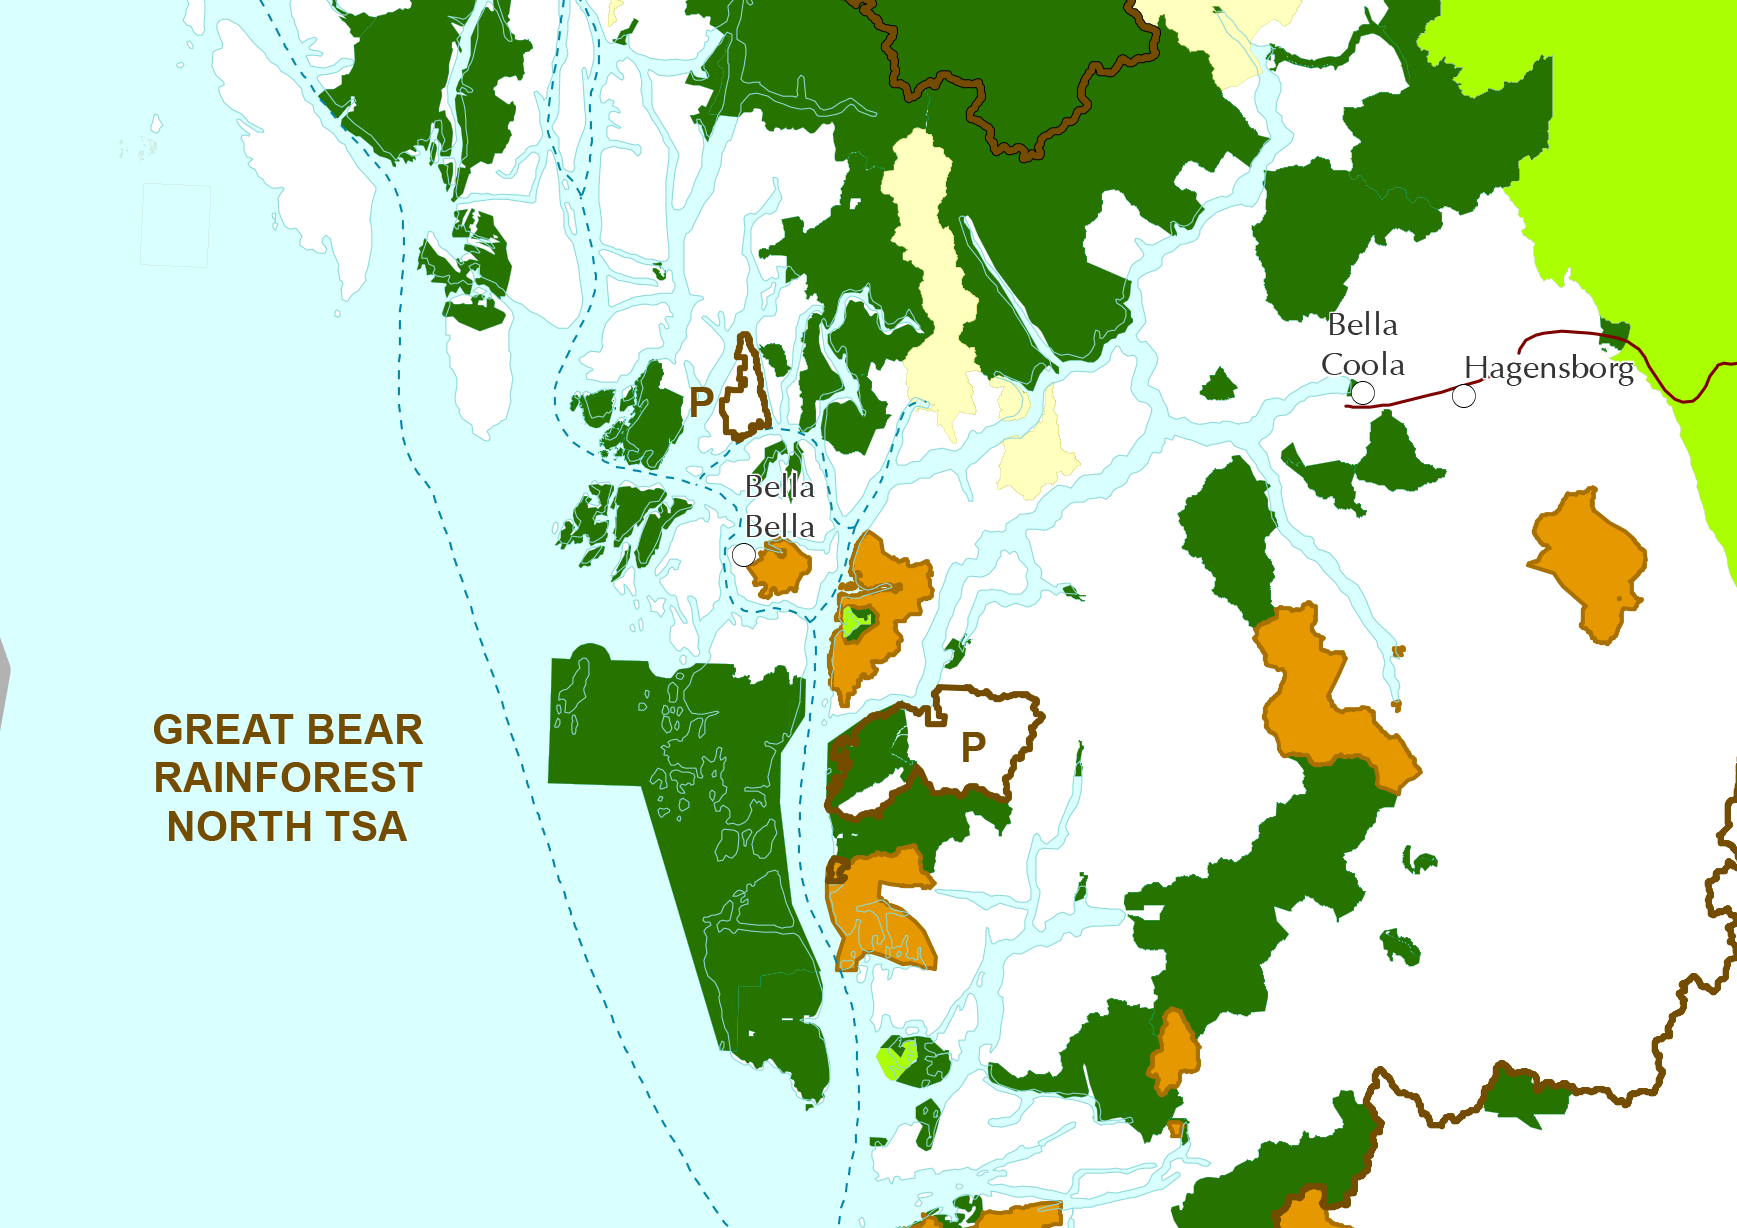 GBR New Timber Supply Areas